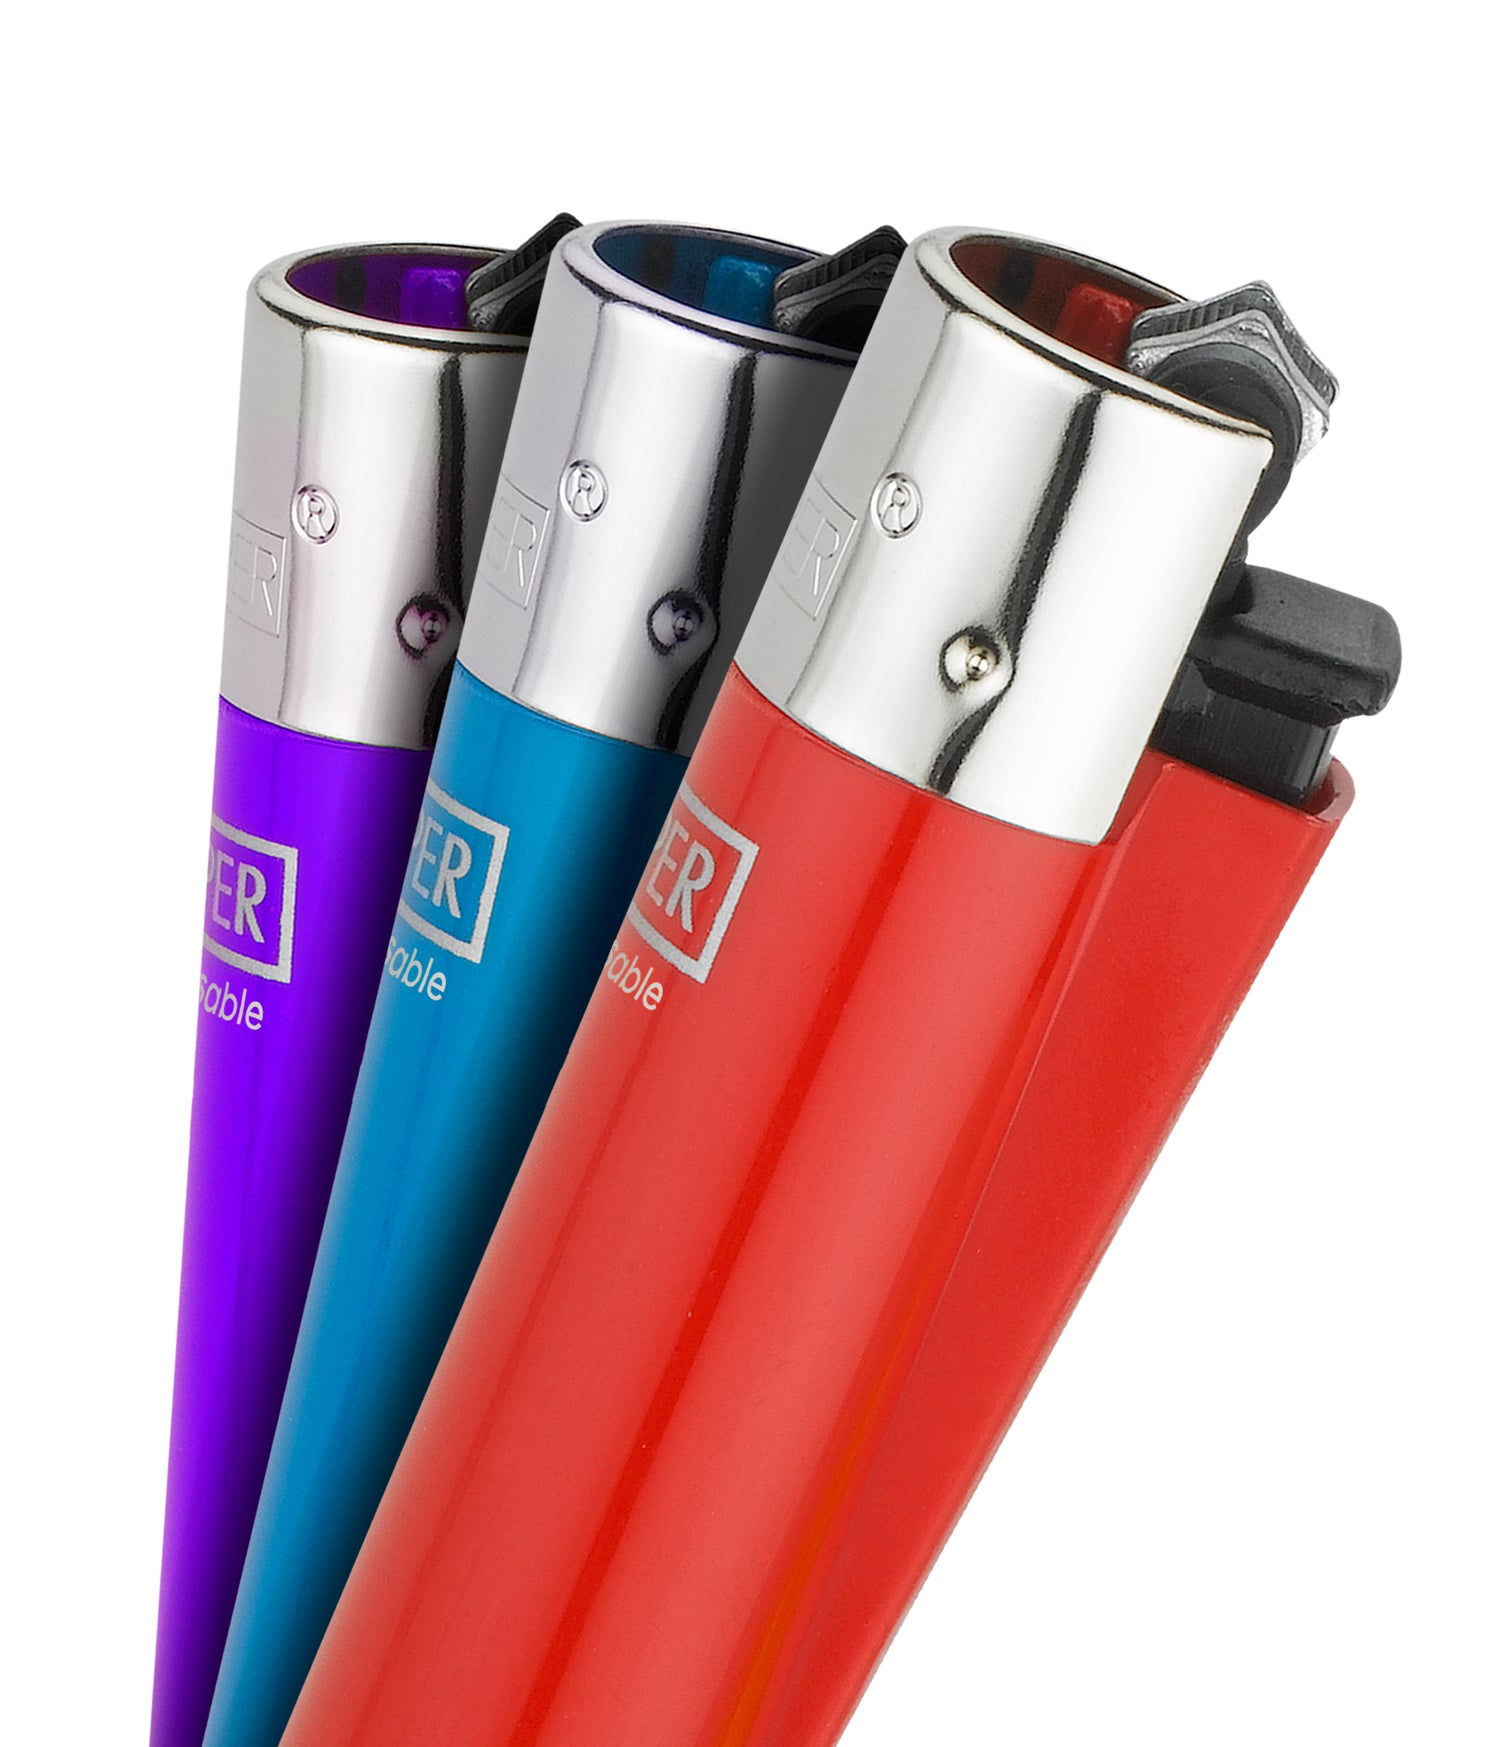 Clipper - The Classic Refillable Lighter for Everyday Use – Clipper US